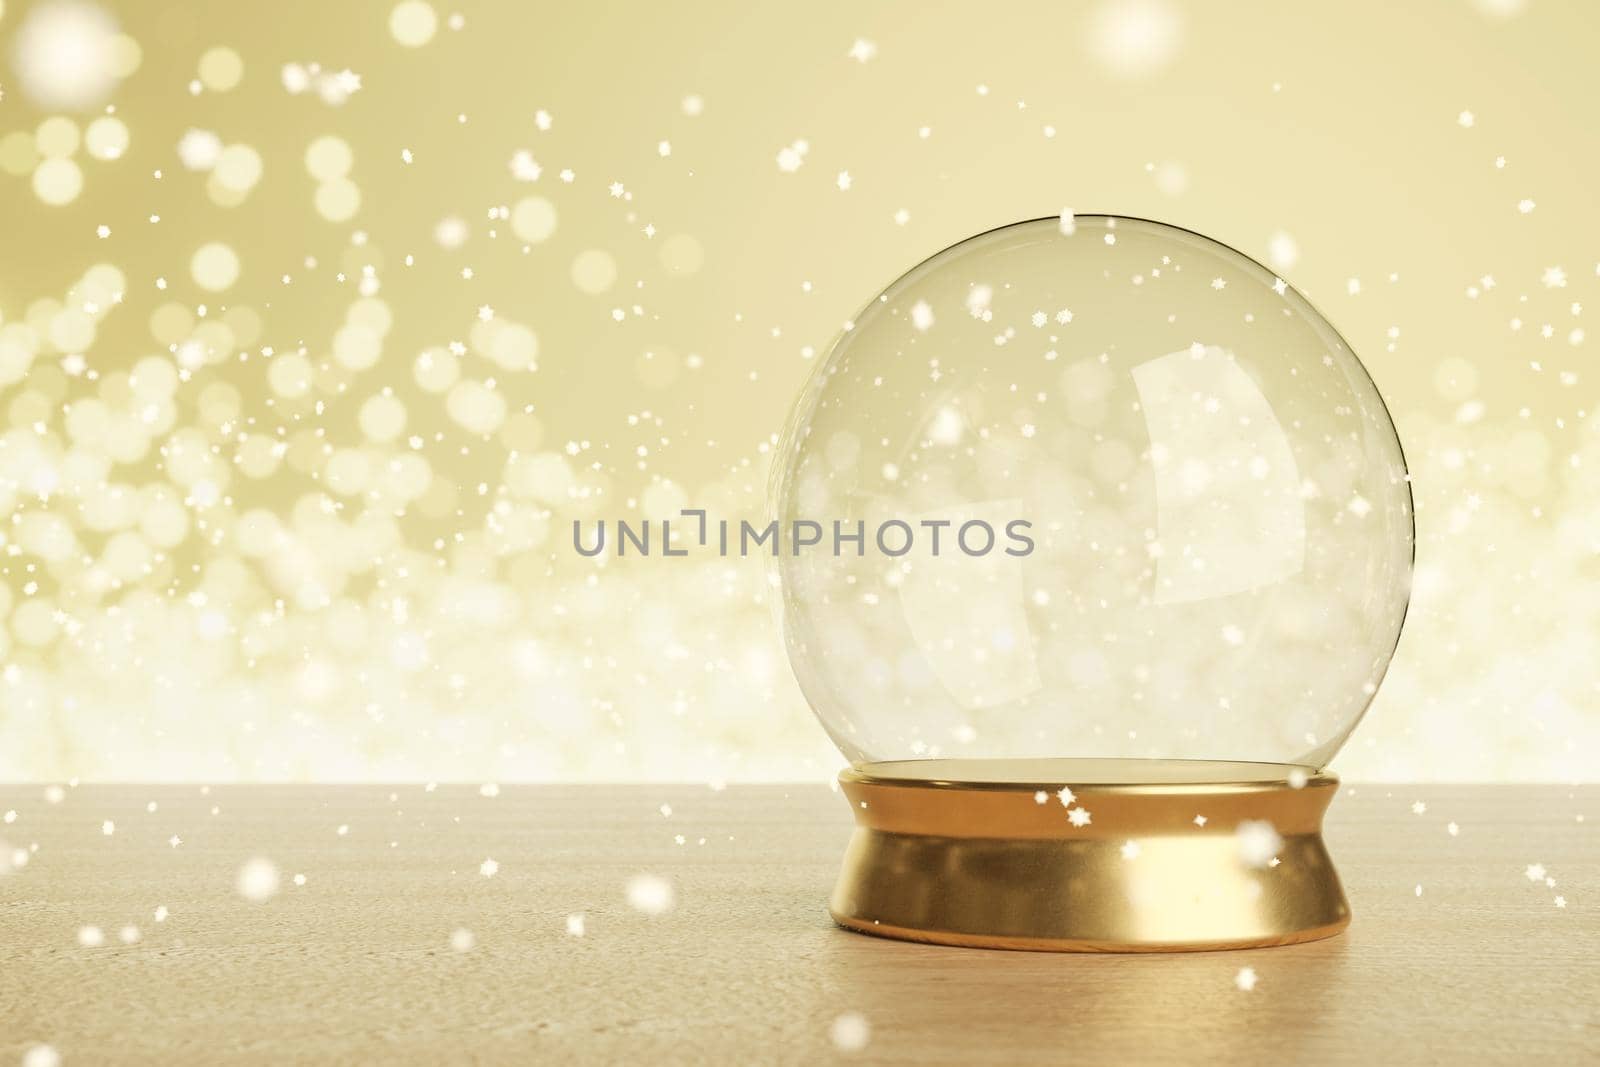 empty christmas ball with glowing background of lights and falling snowflakes. copy space. 3d rendering